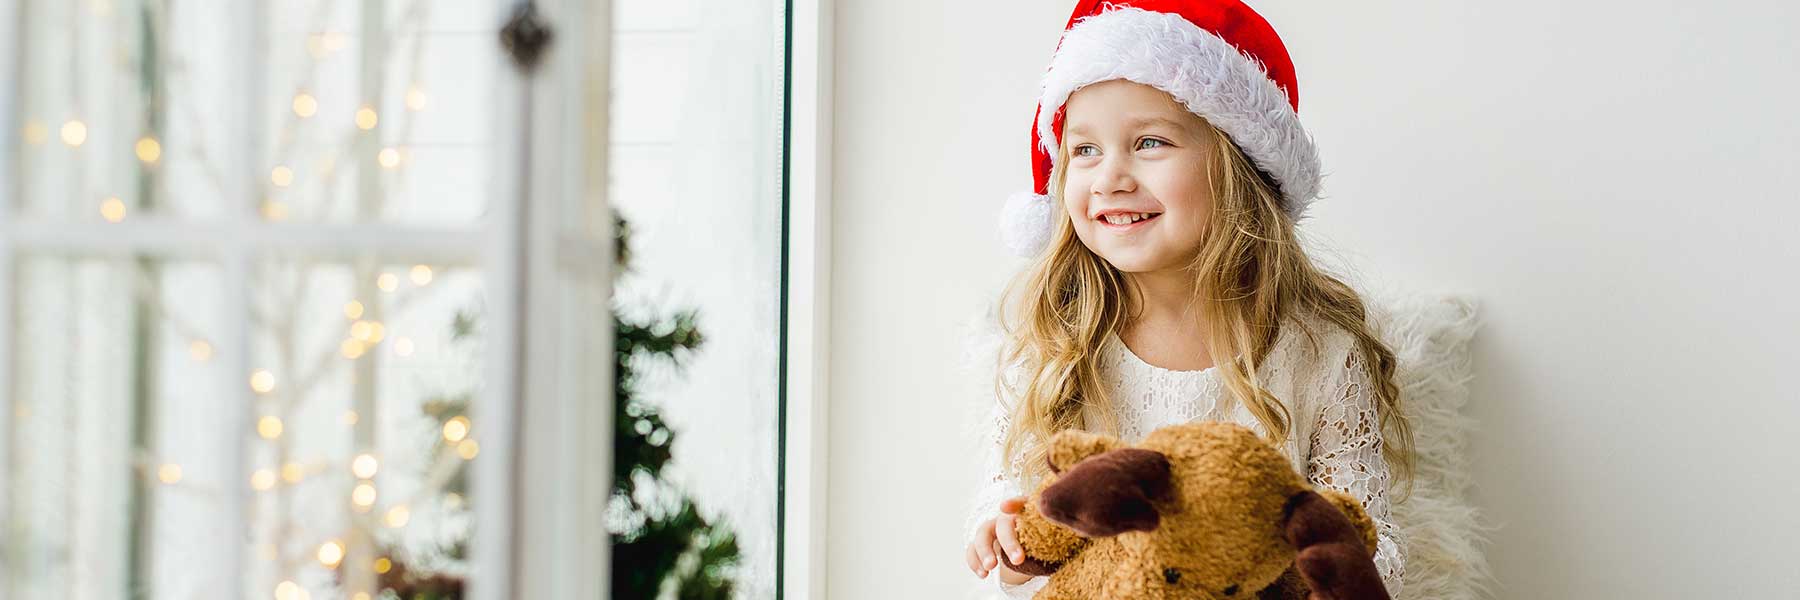 Christmas and Holiday Contact for Children | Morrison Kent Lawyers